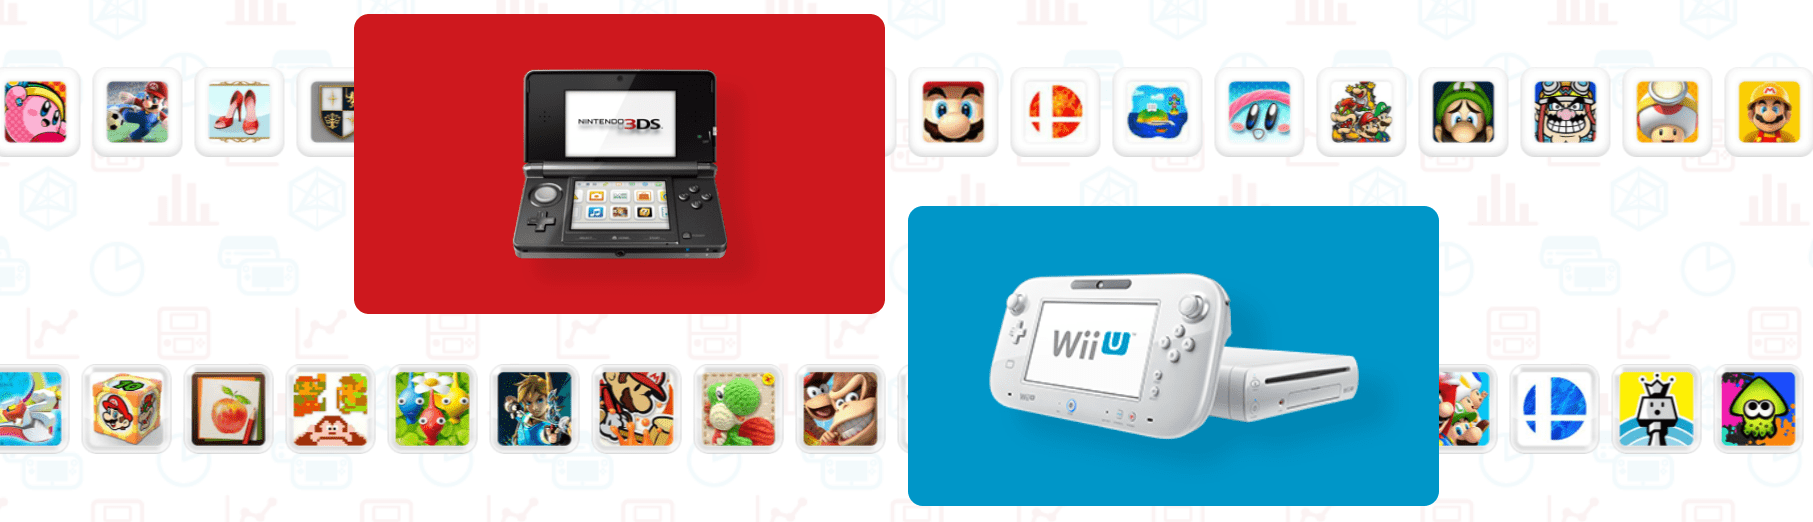 The Nintendo 3DS And Wii U eShop Are Now Closed